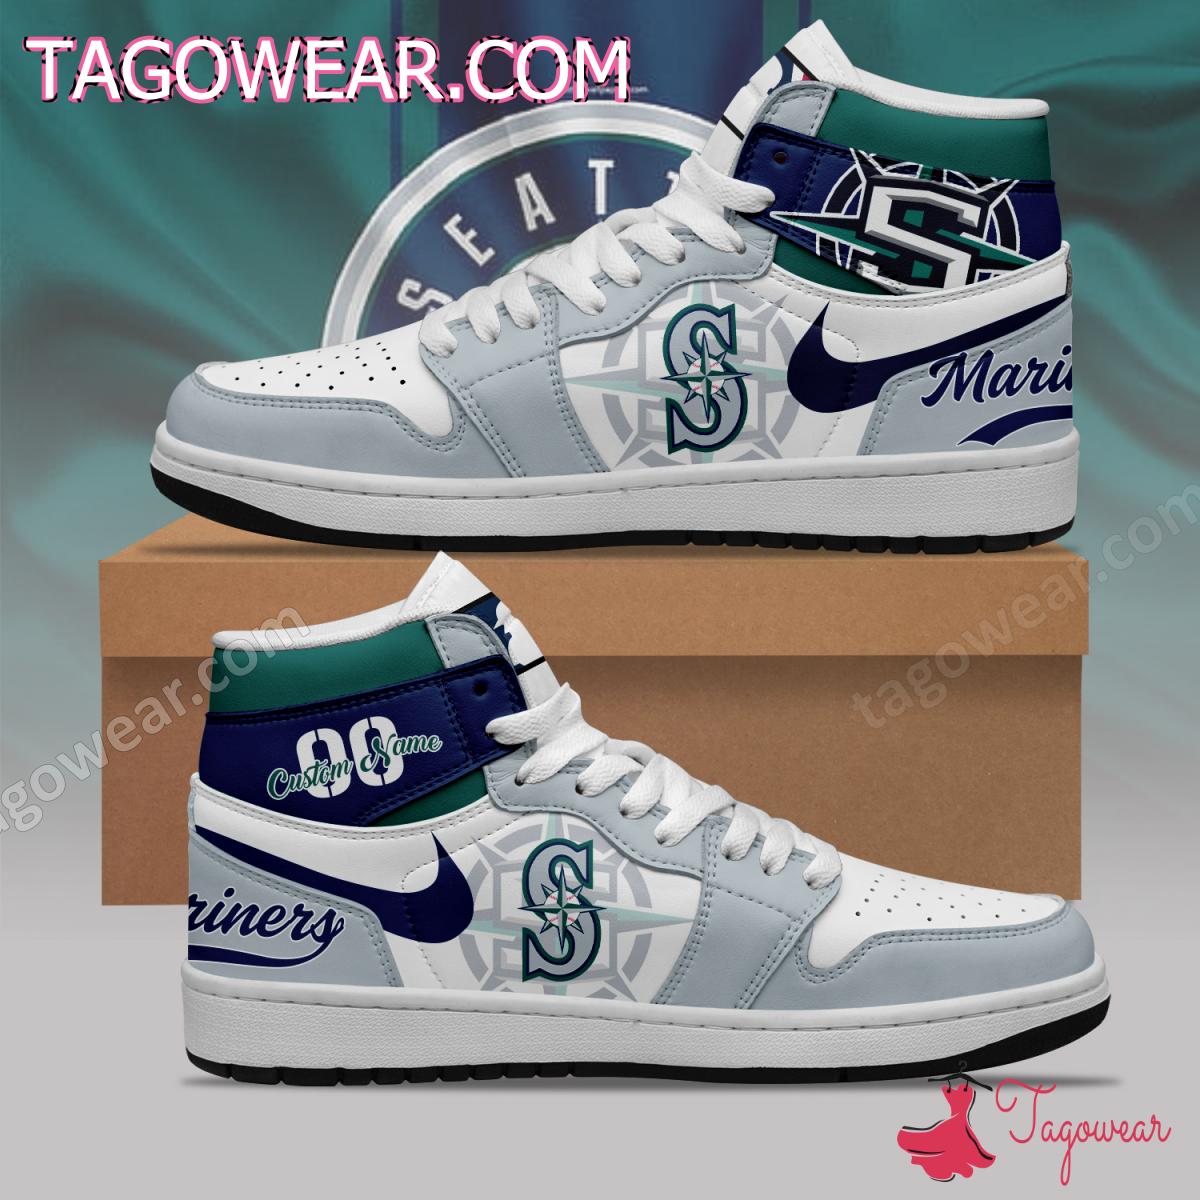 Mlb Seattle Mariners Personalized Air Jordan High Top Shoes